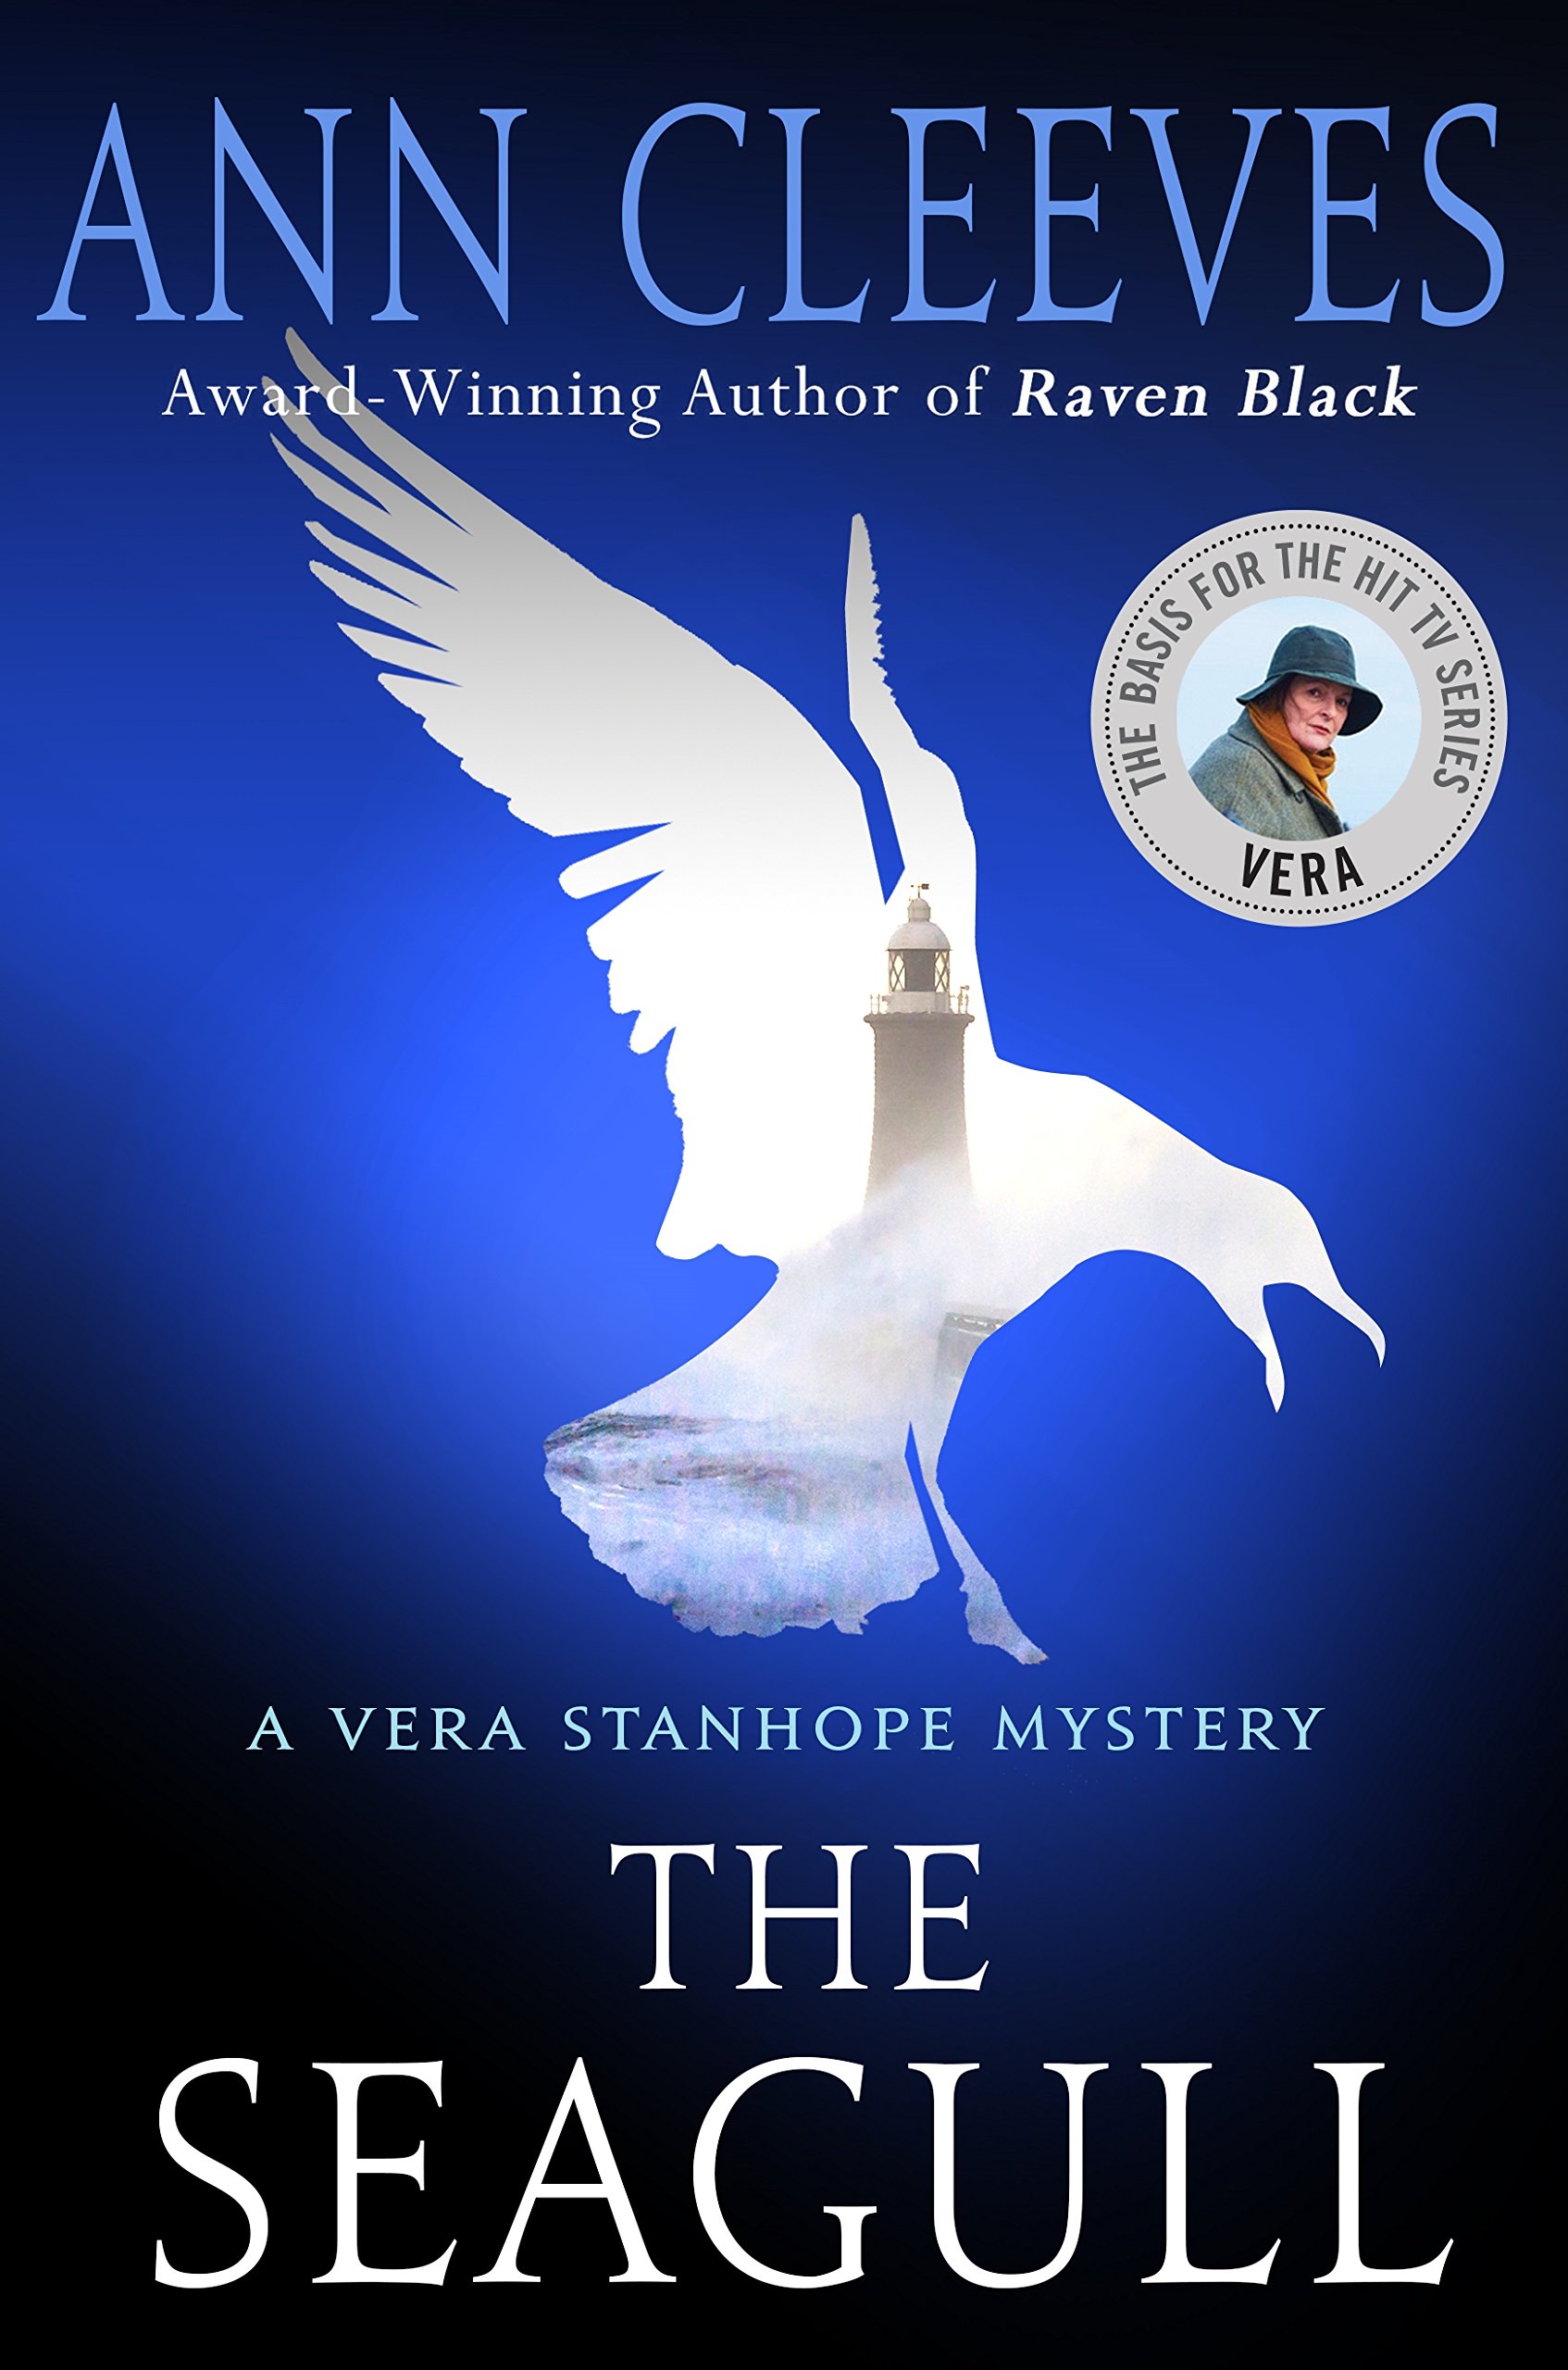 The Seagull: A Vera Stanhope Mystery: Ann Cleeves: 9781250124869 ...